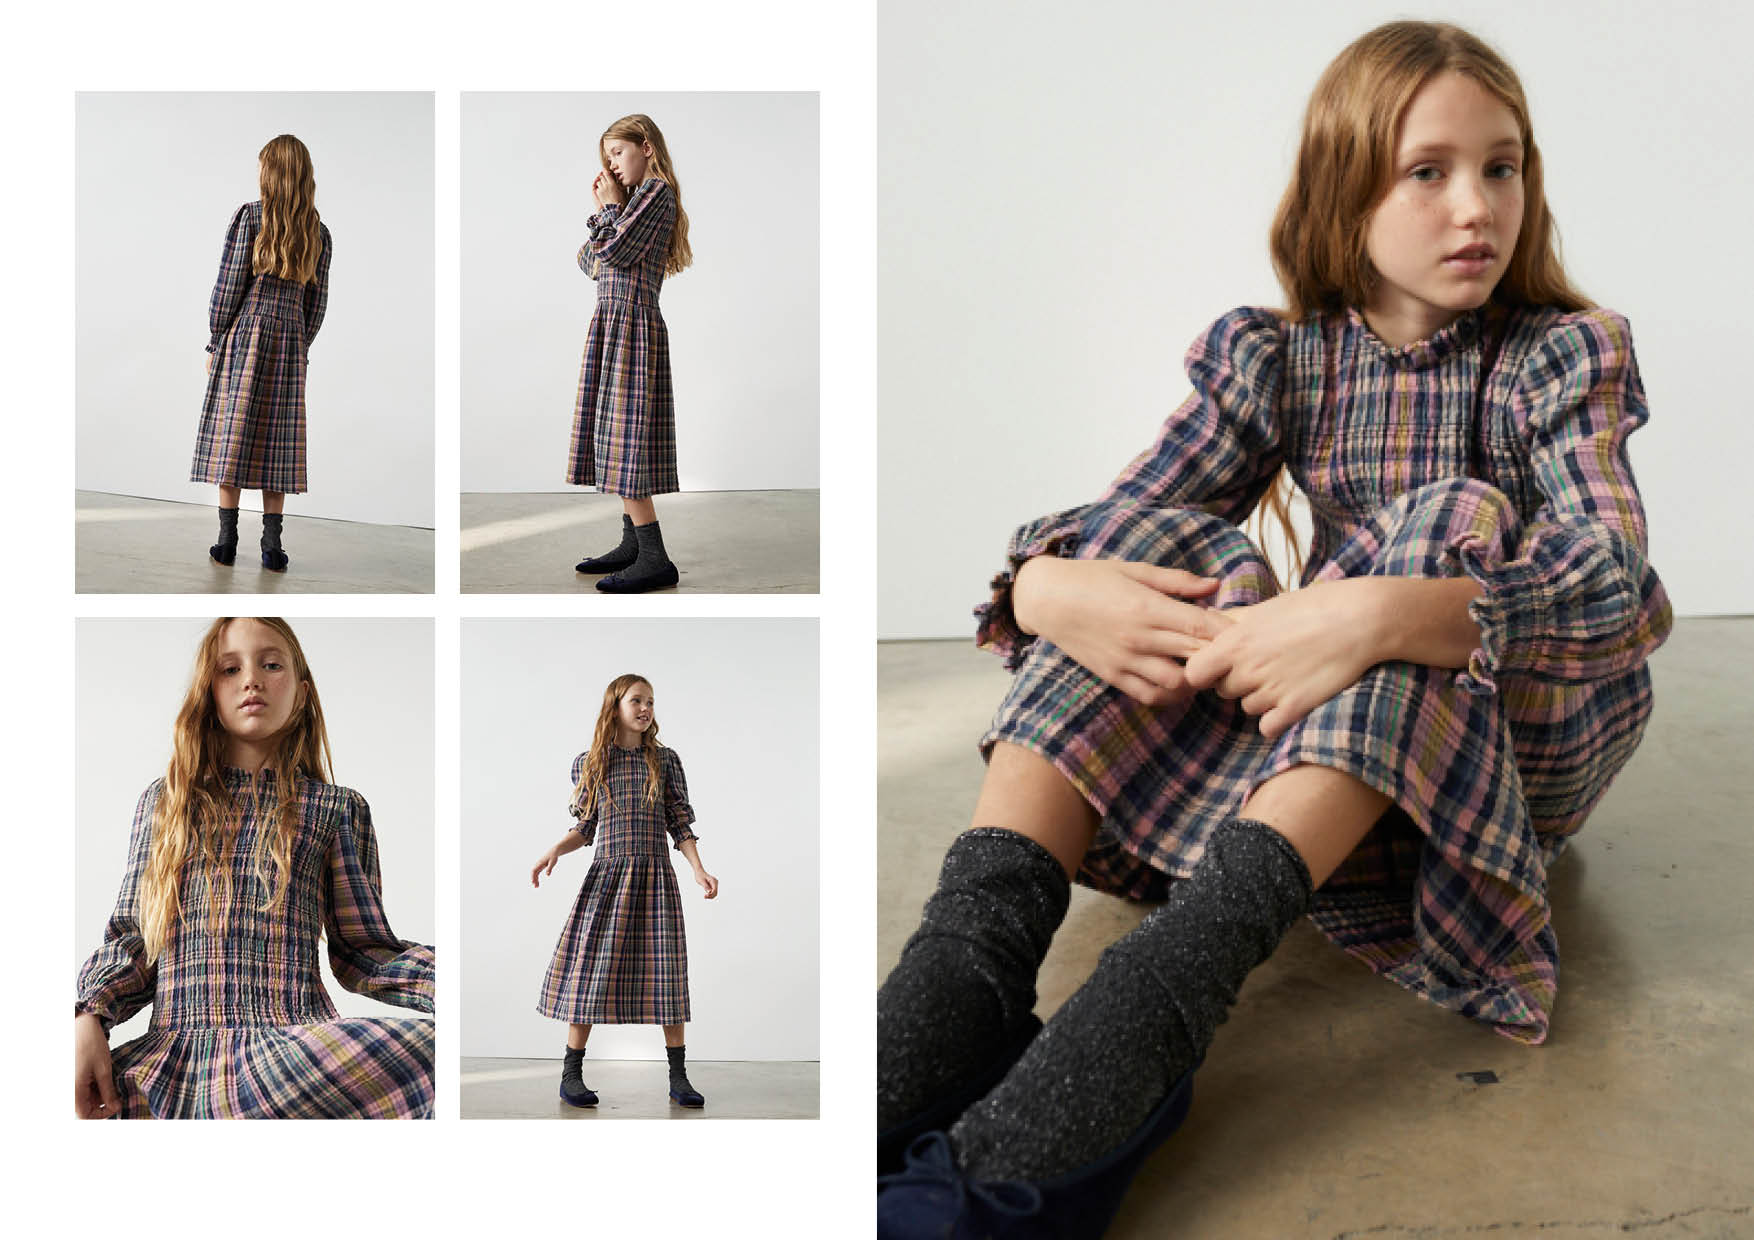 LOOKBOOK KIDS – We are the new society